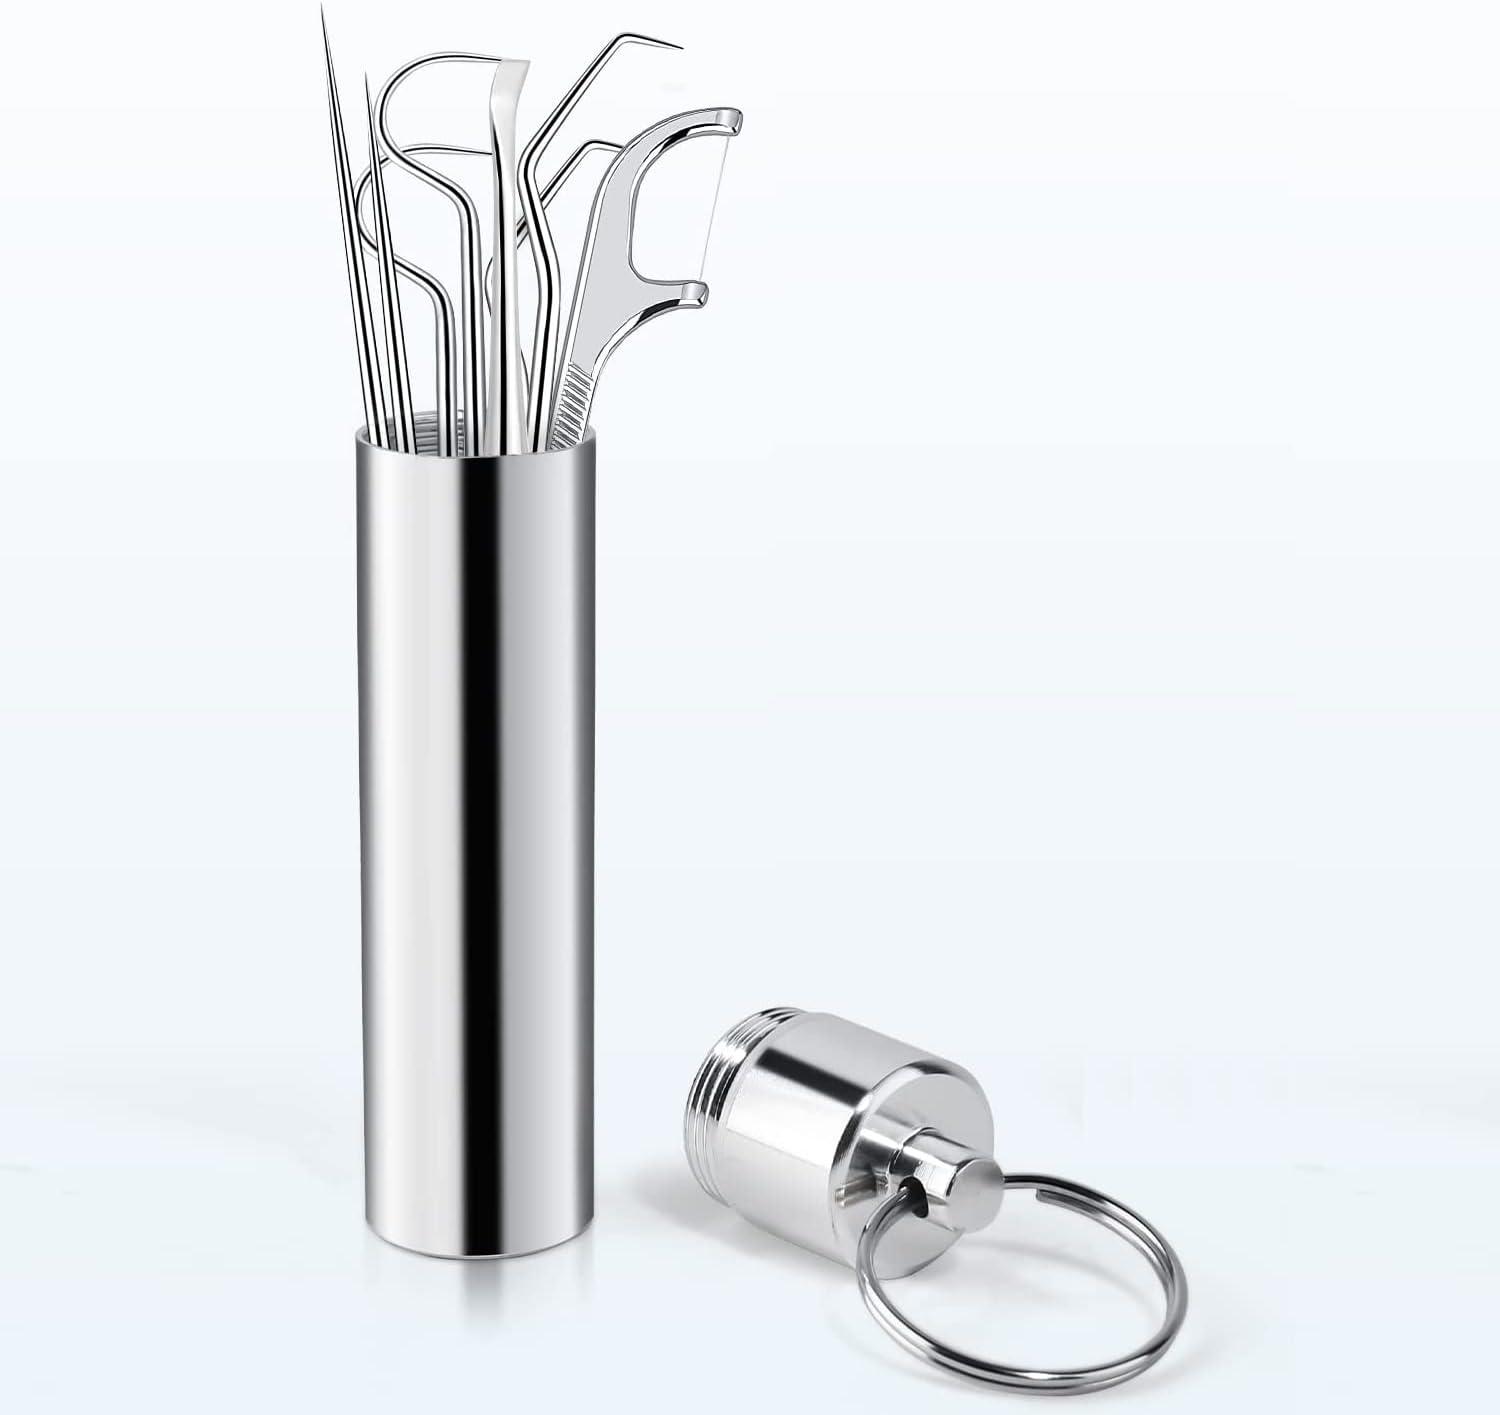 Portable Stainless Steel Toothpick Holder - Mobile Toothpick Case - Easy to Carry in Your Pocket, Bag, and Much